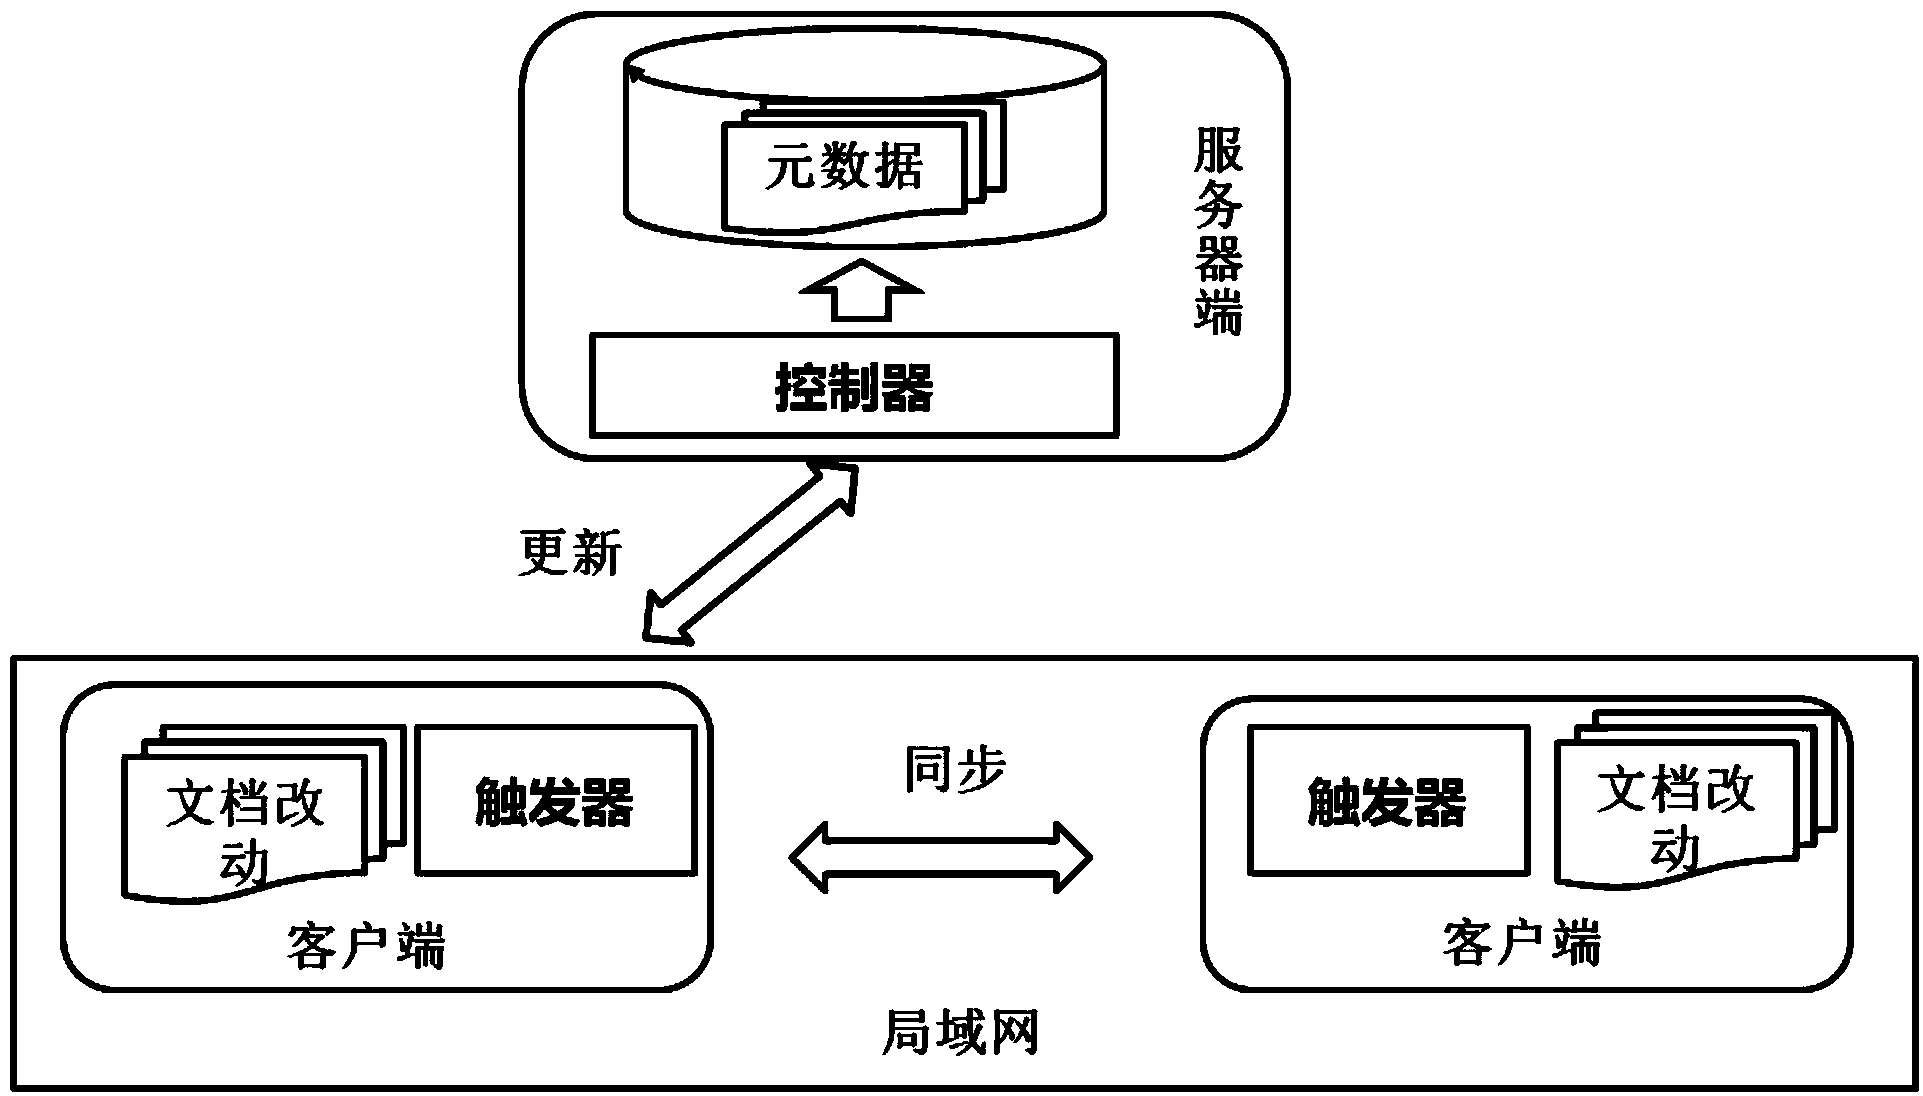 Cloud synchronous local area network accelerating system based on working group document